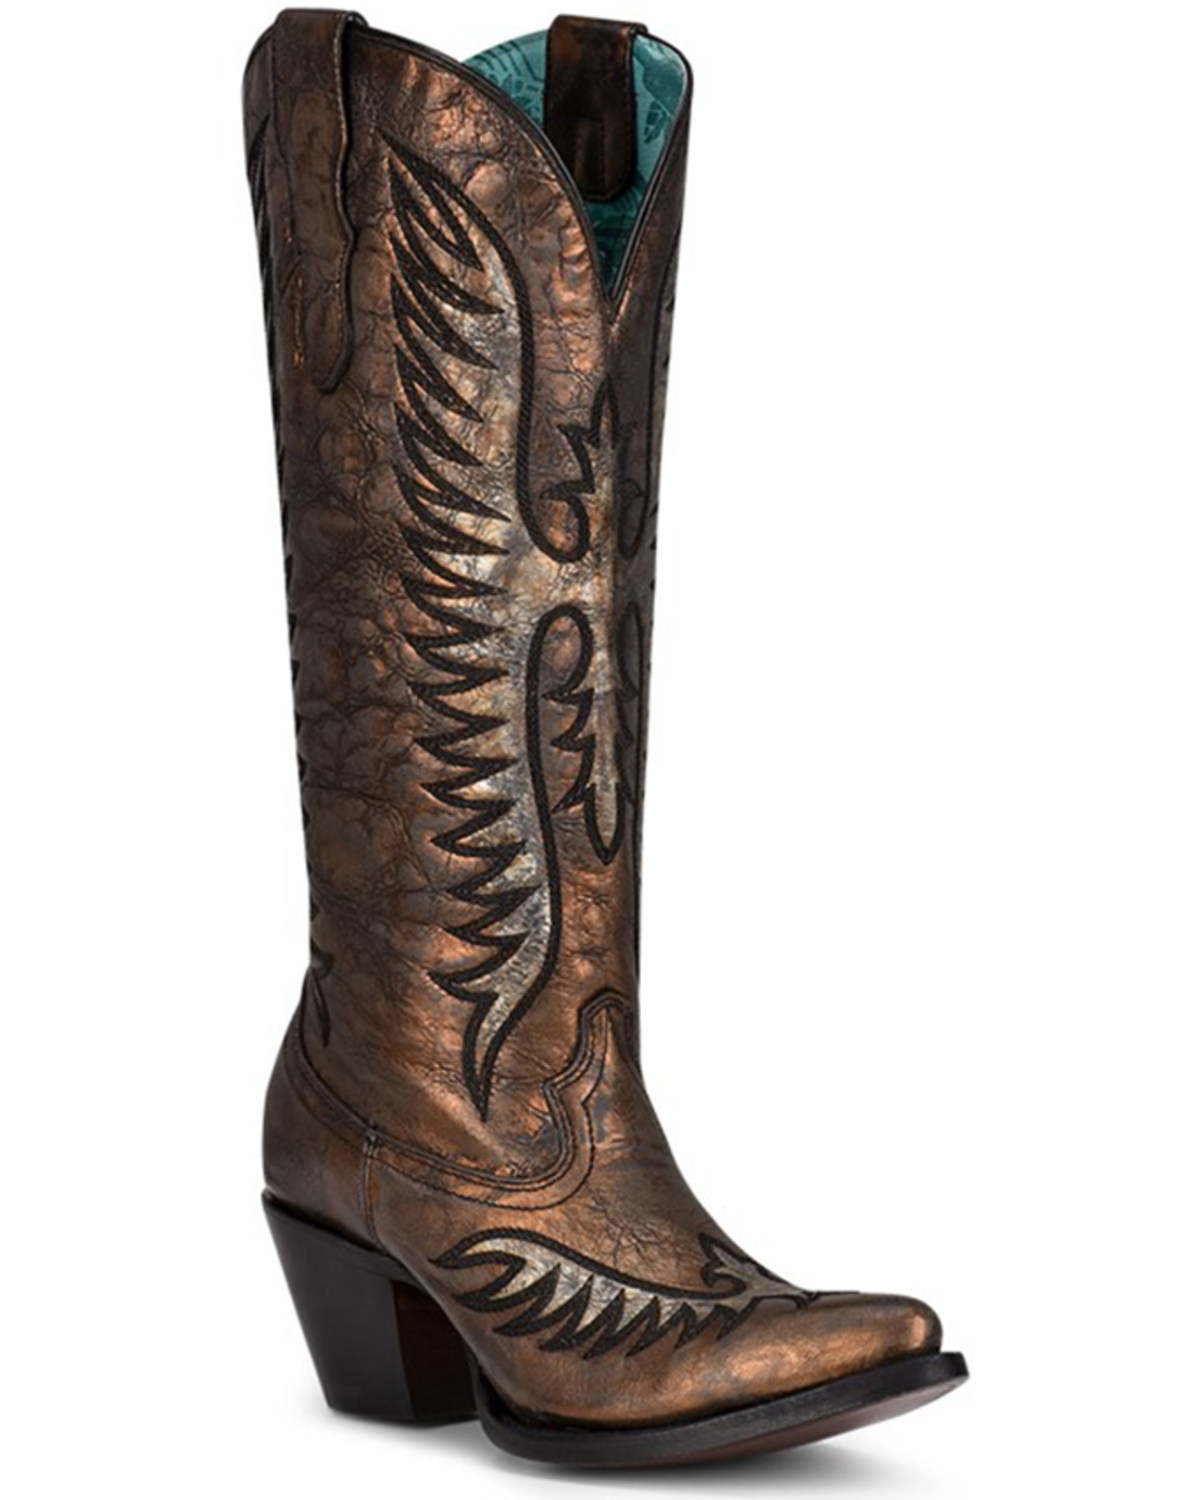 Corral Women's Embroidery Western Boots - Medium Toe